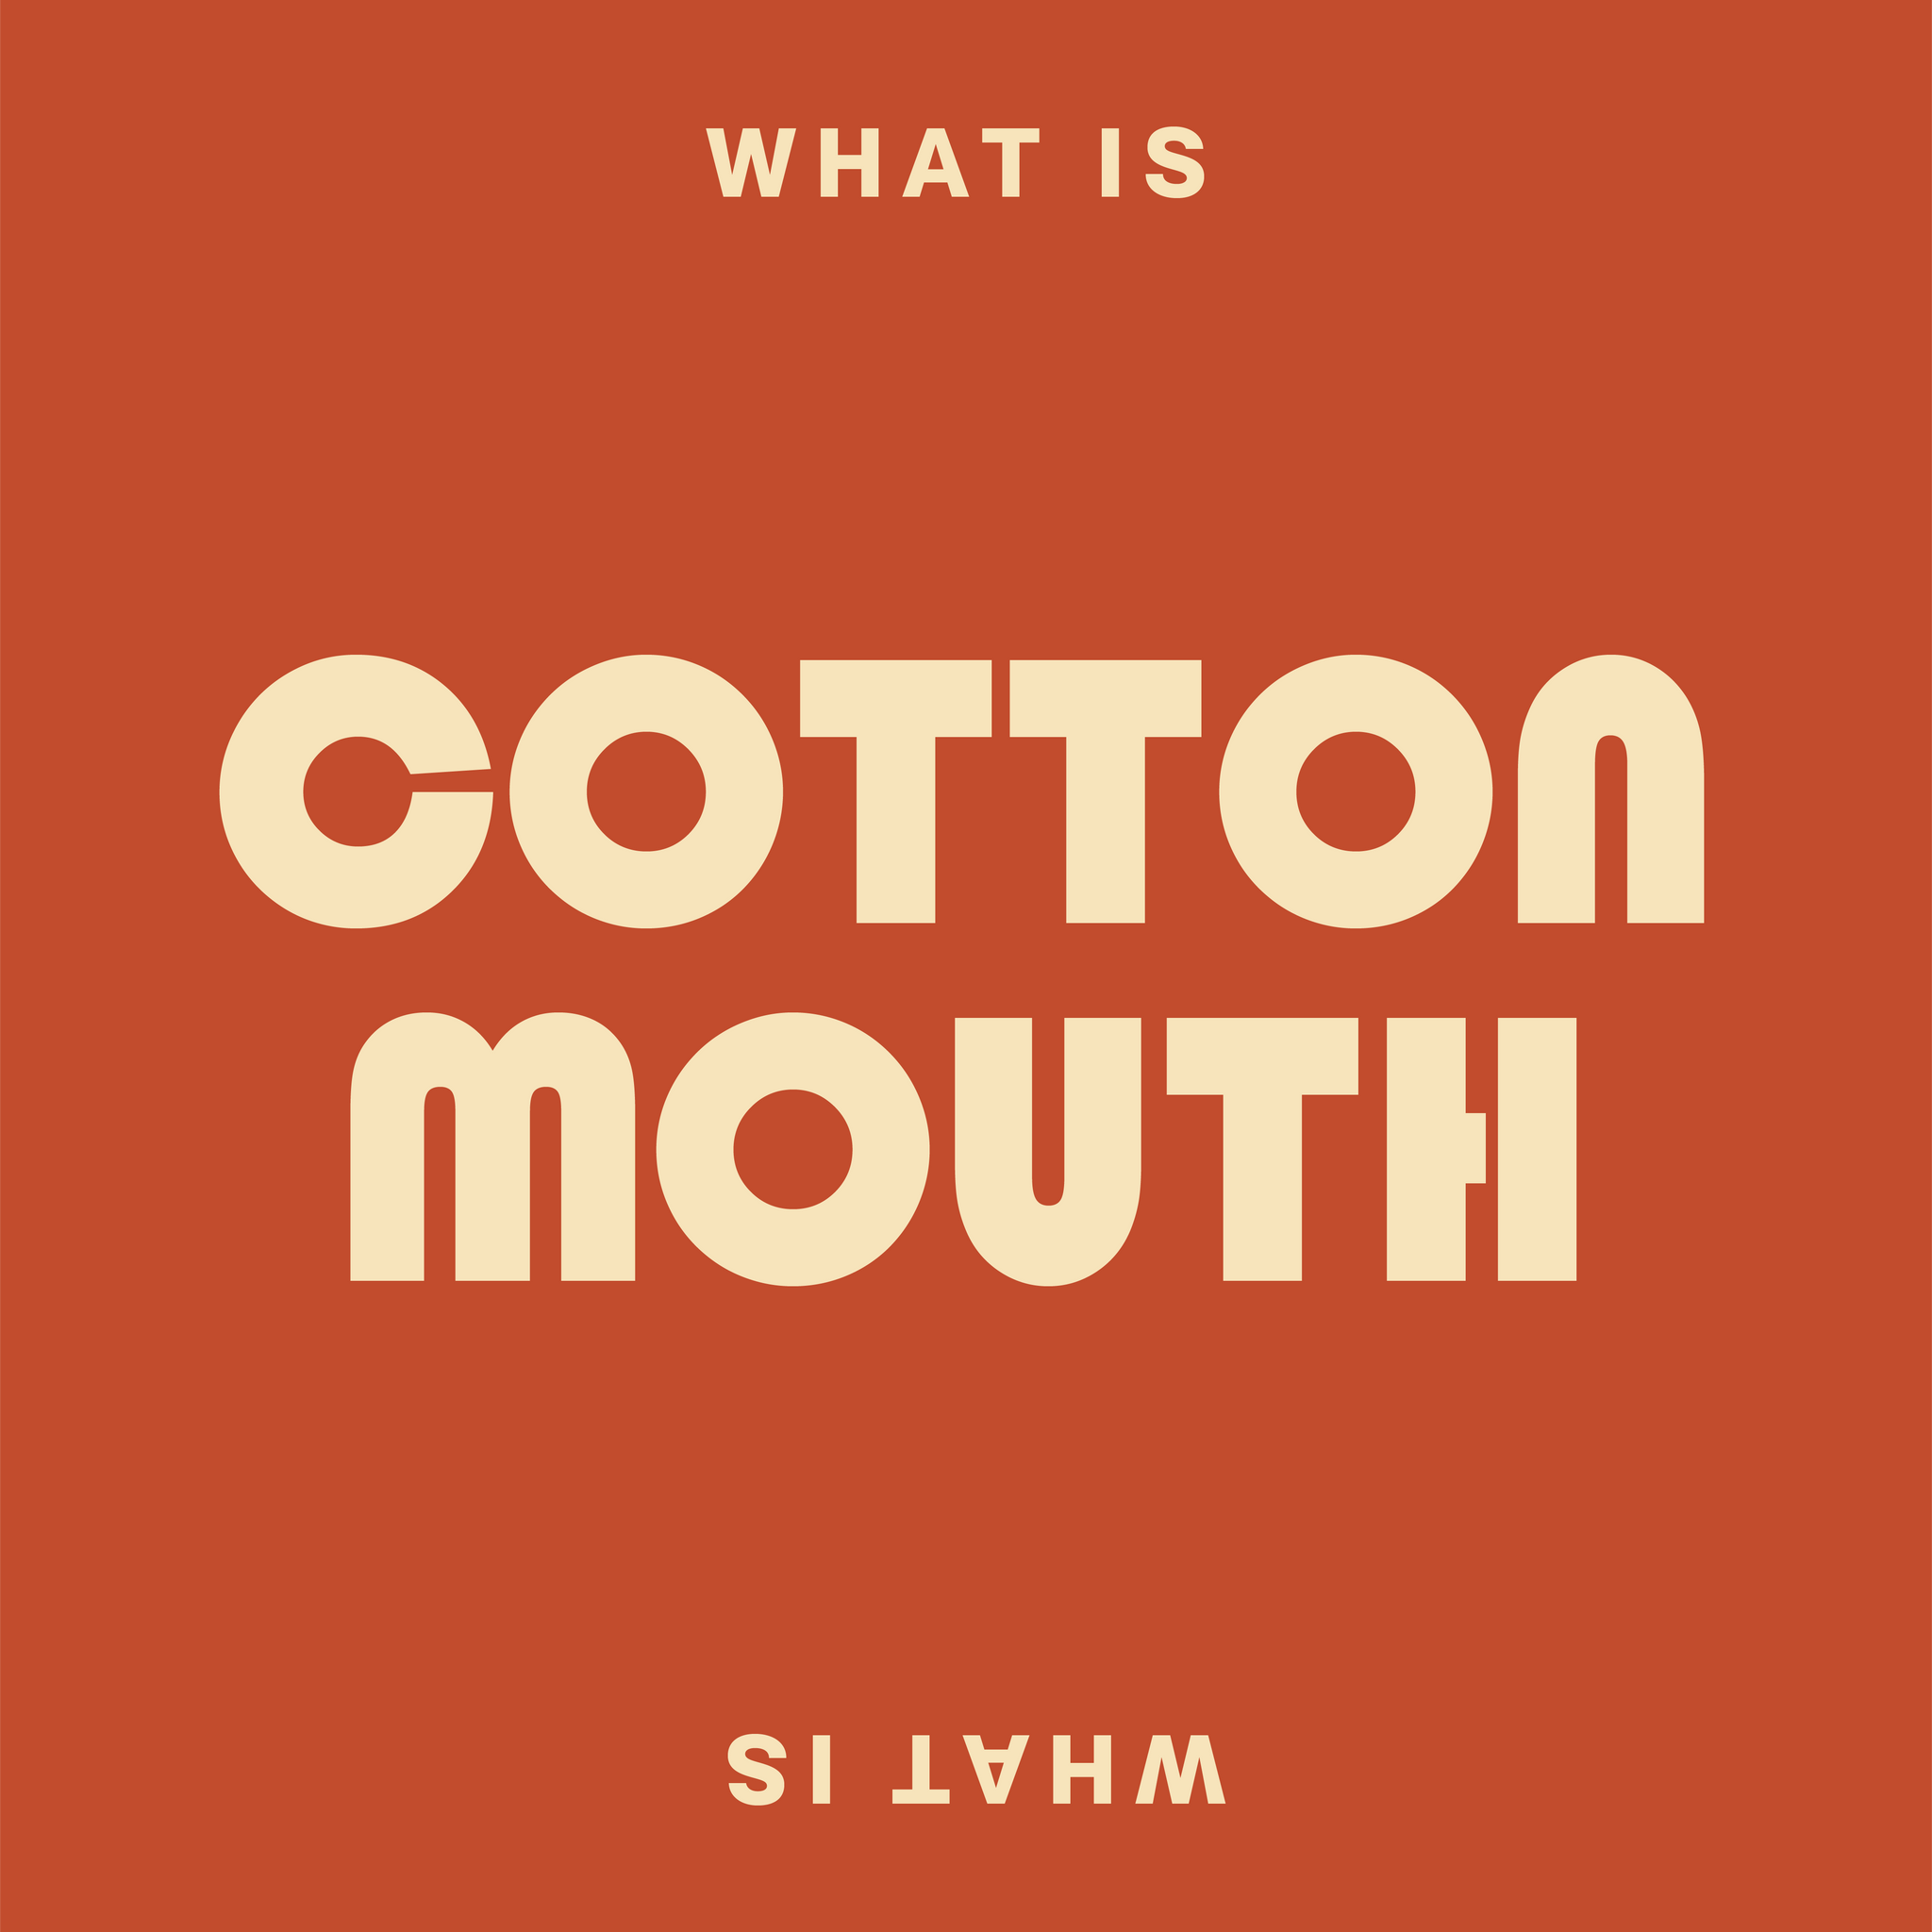 What Is Cottonmouth?